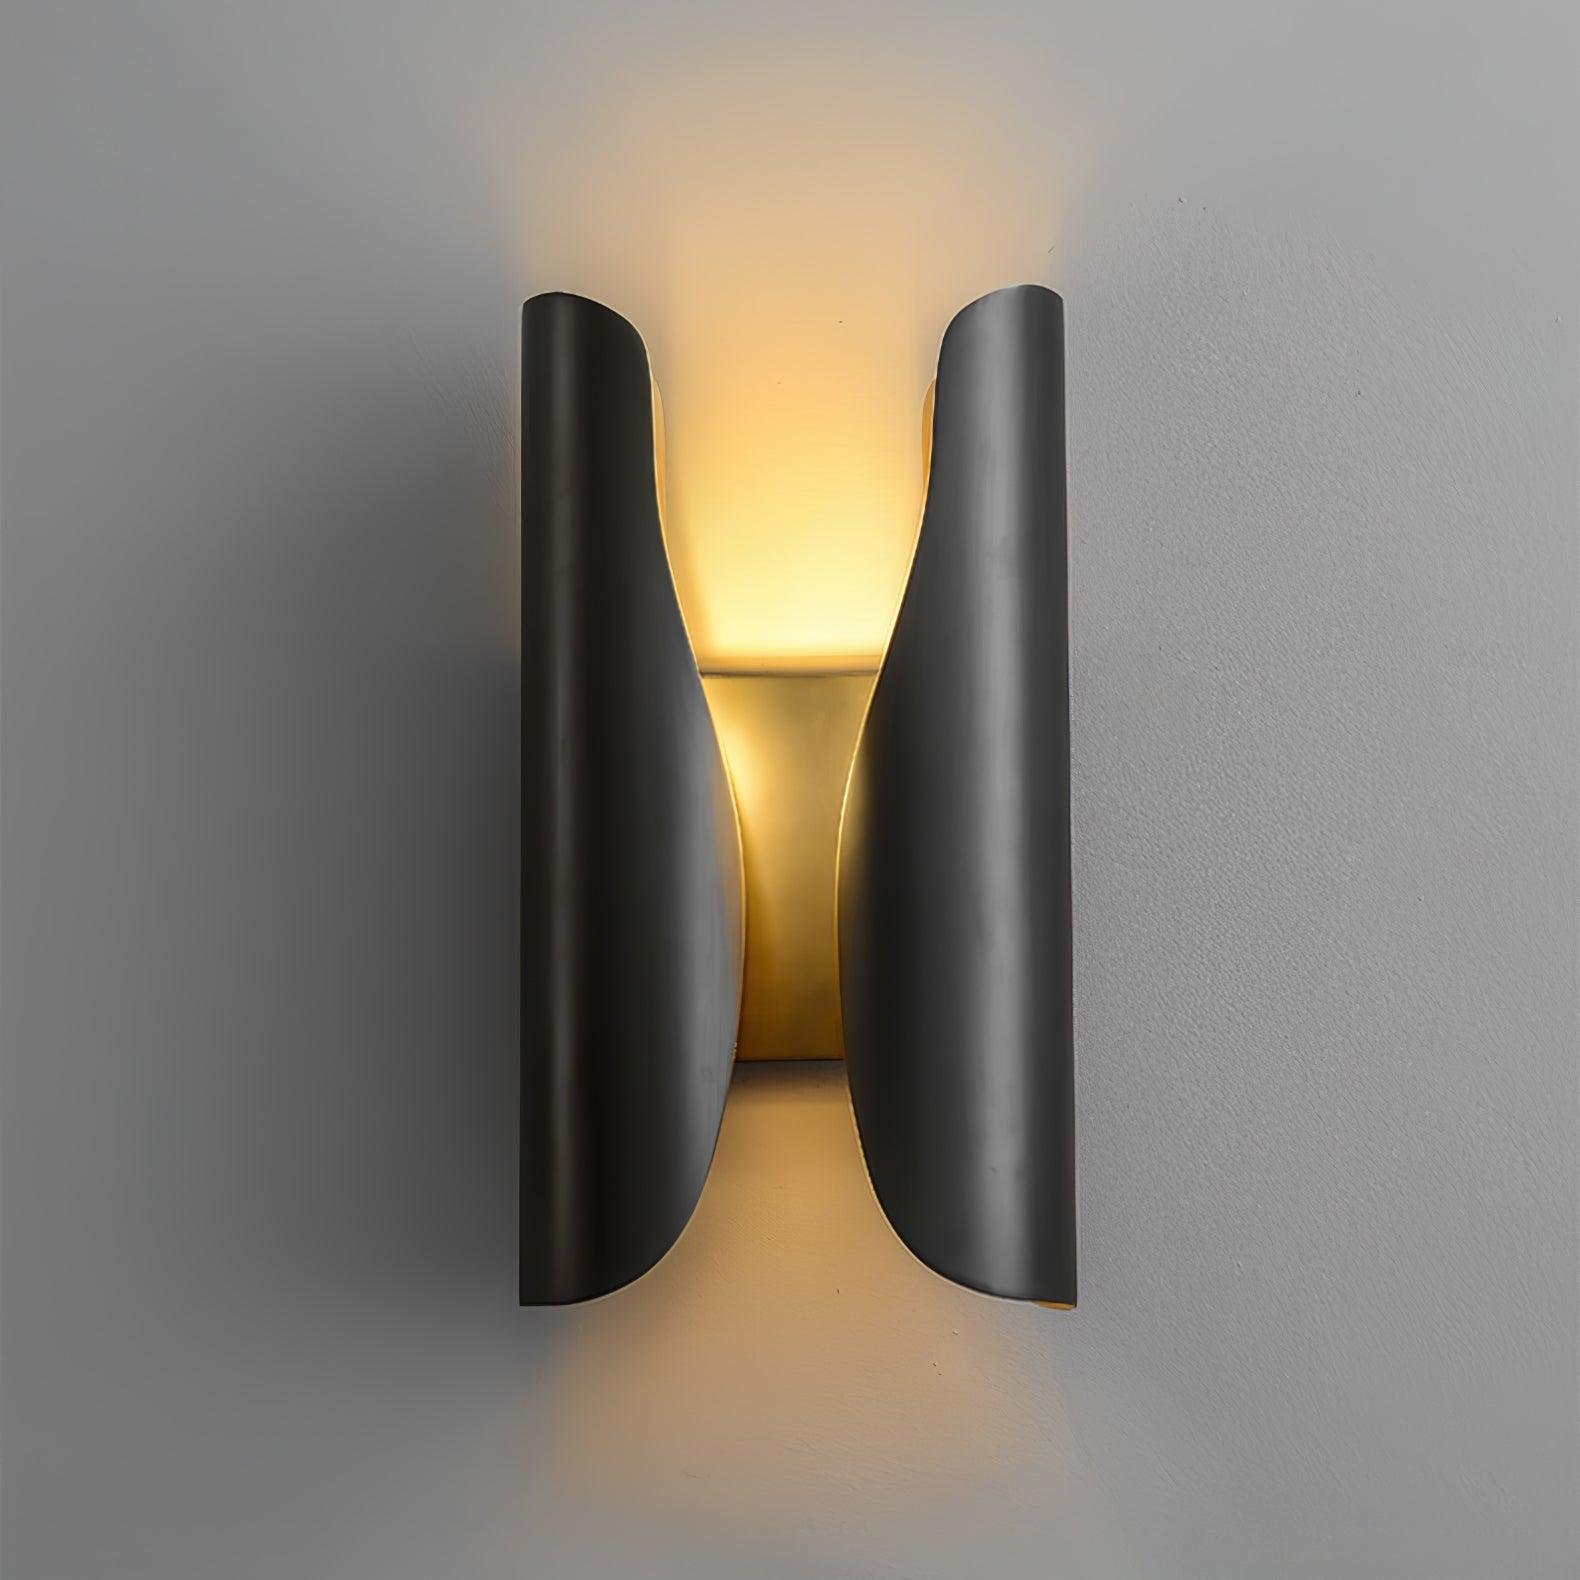 Blackened Guardian Wall Sconce Set of 2